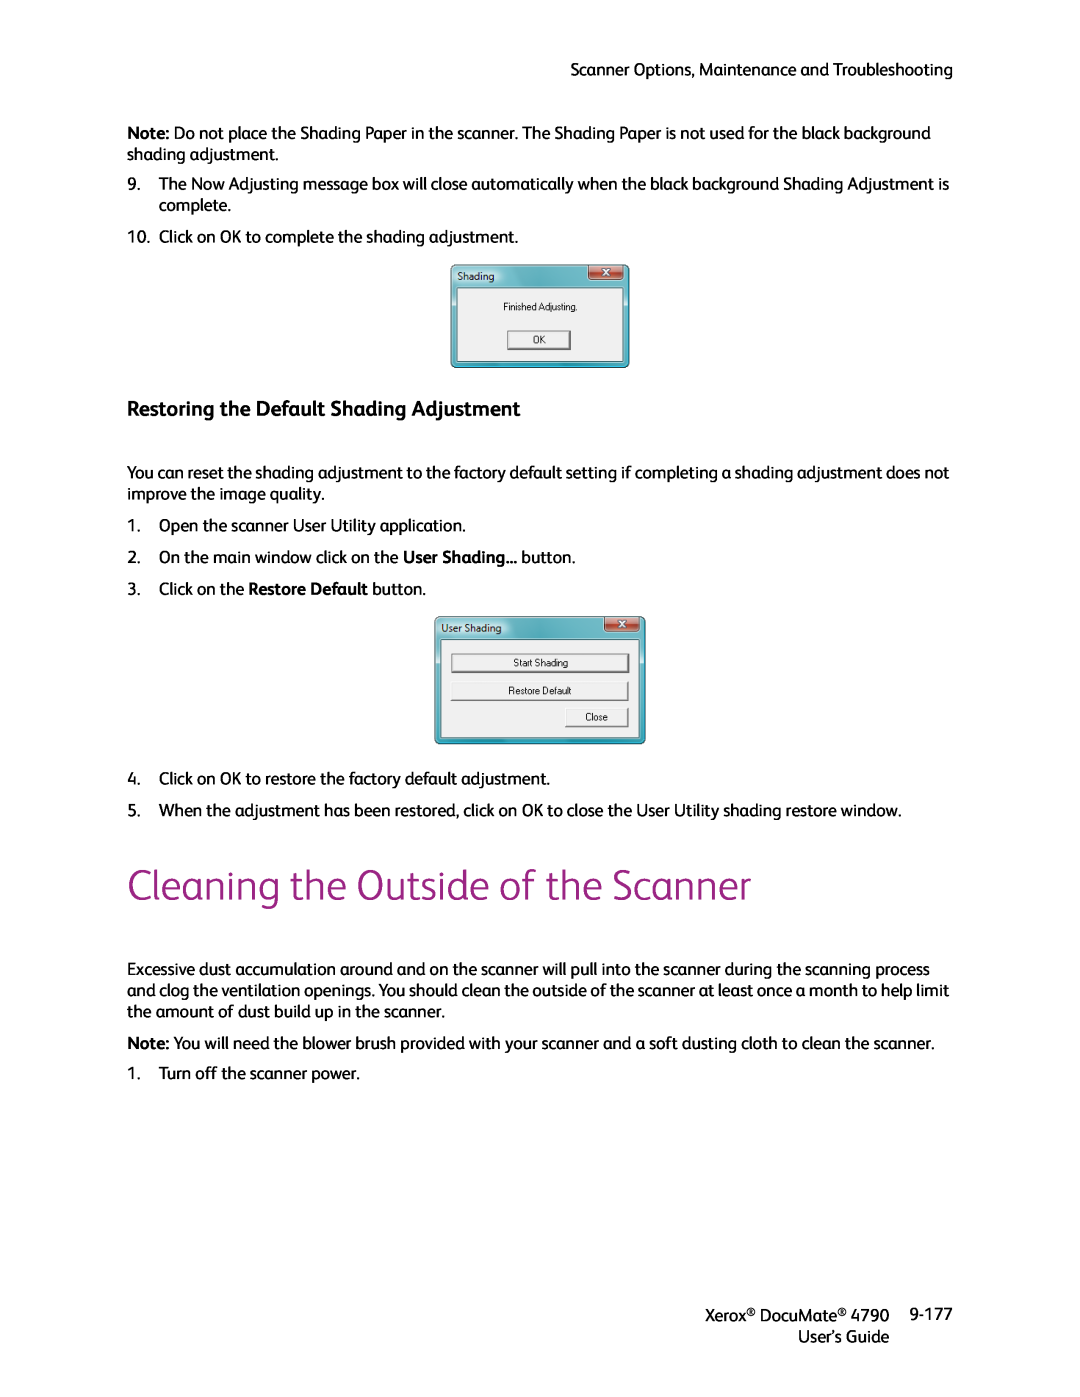 Xerox xerox documate manual Cleaning the Outside of the Scanner, Restoring the Default Shading Adjustment 